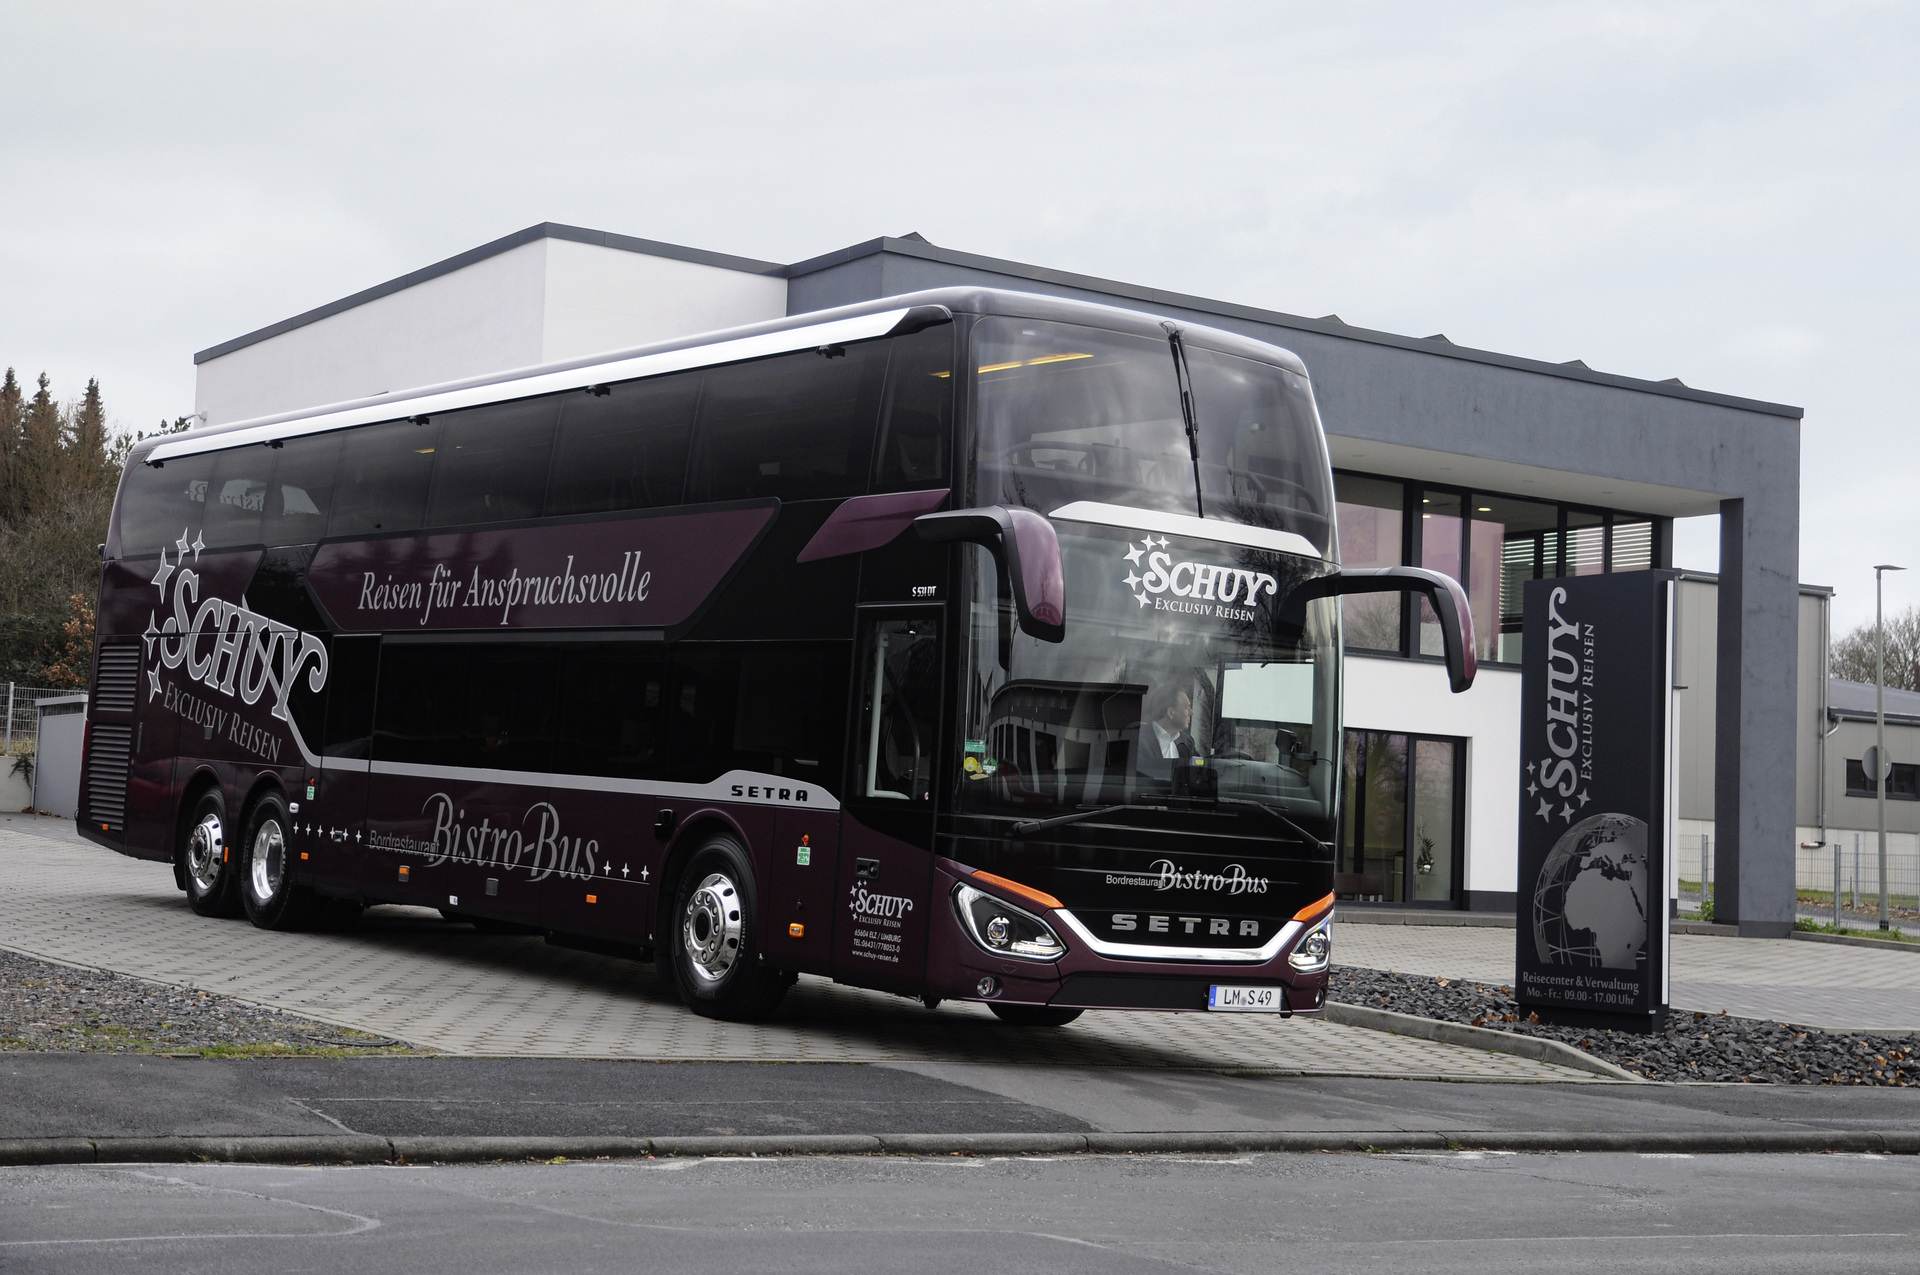 Setra DT offers luxurious comfort on two levels